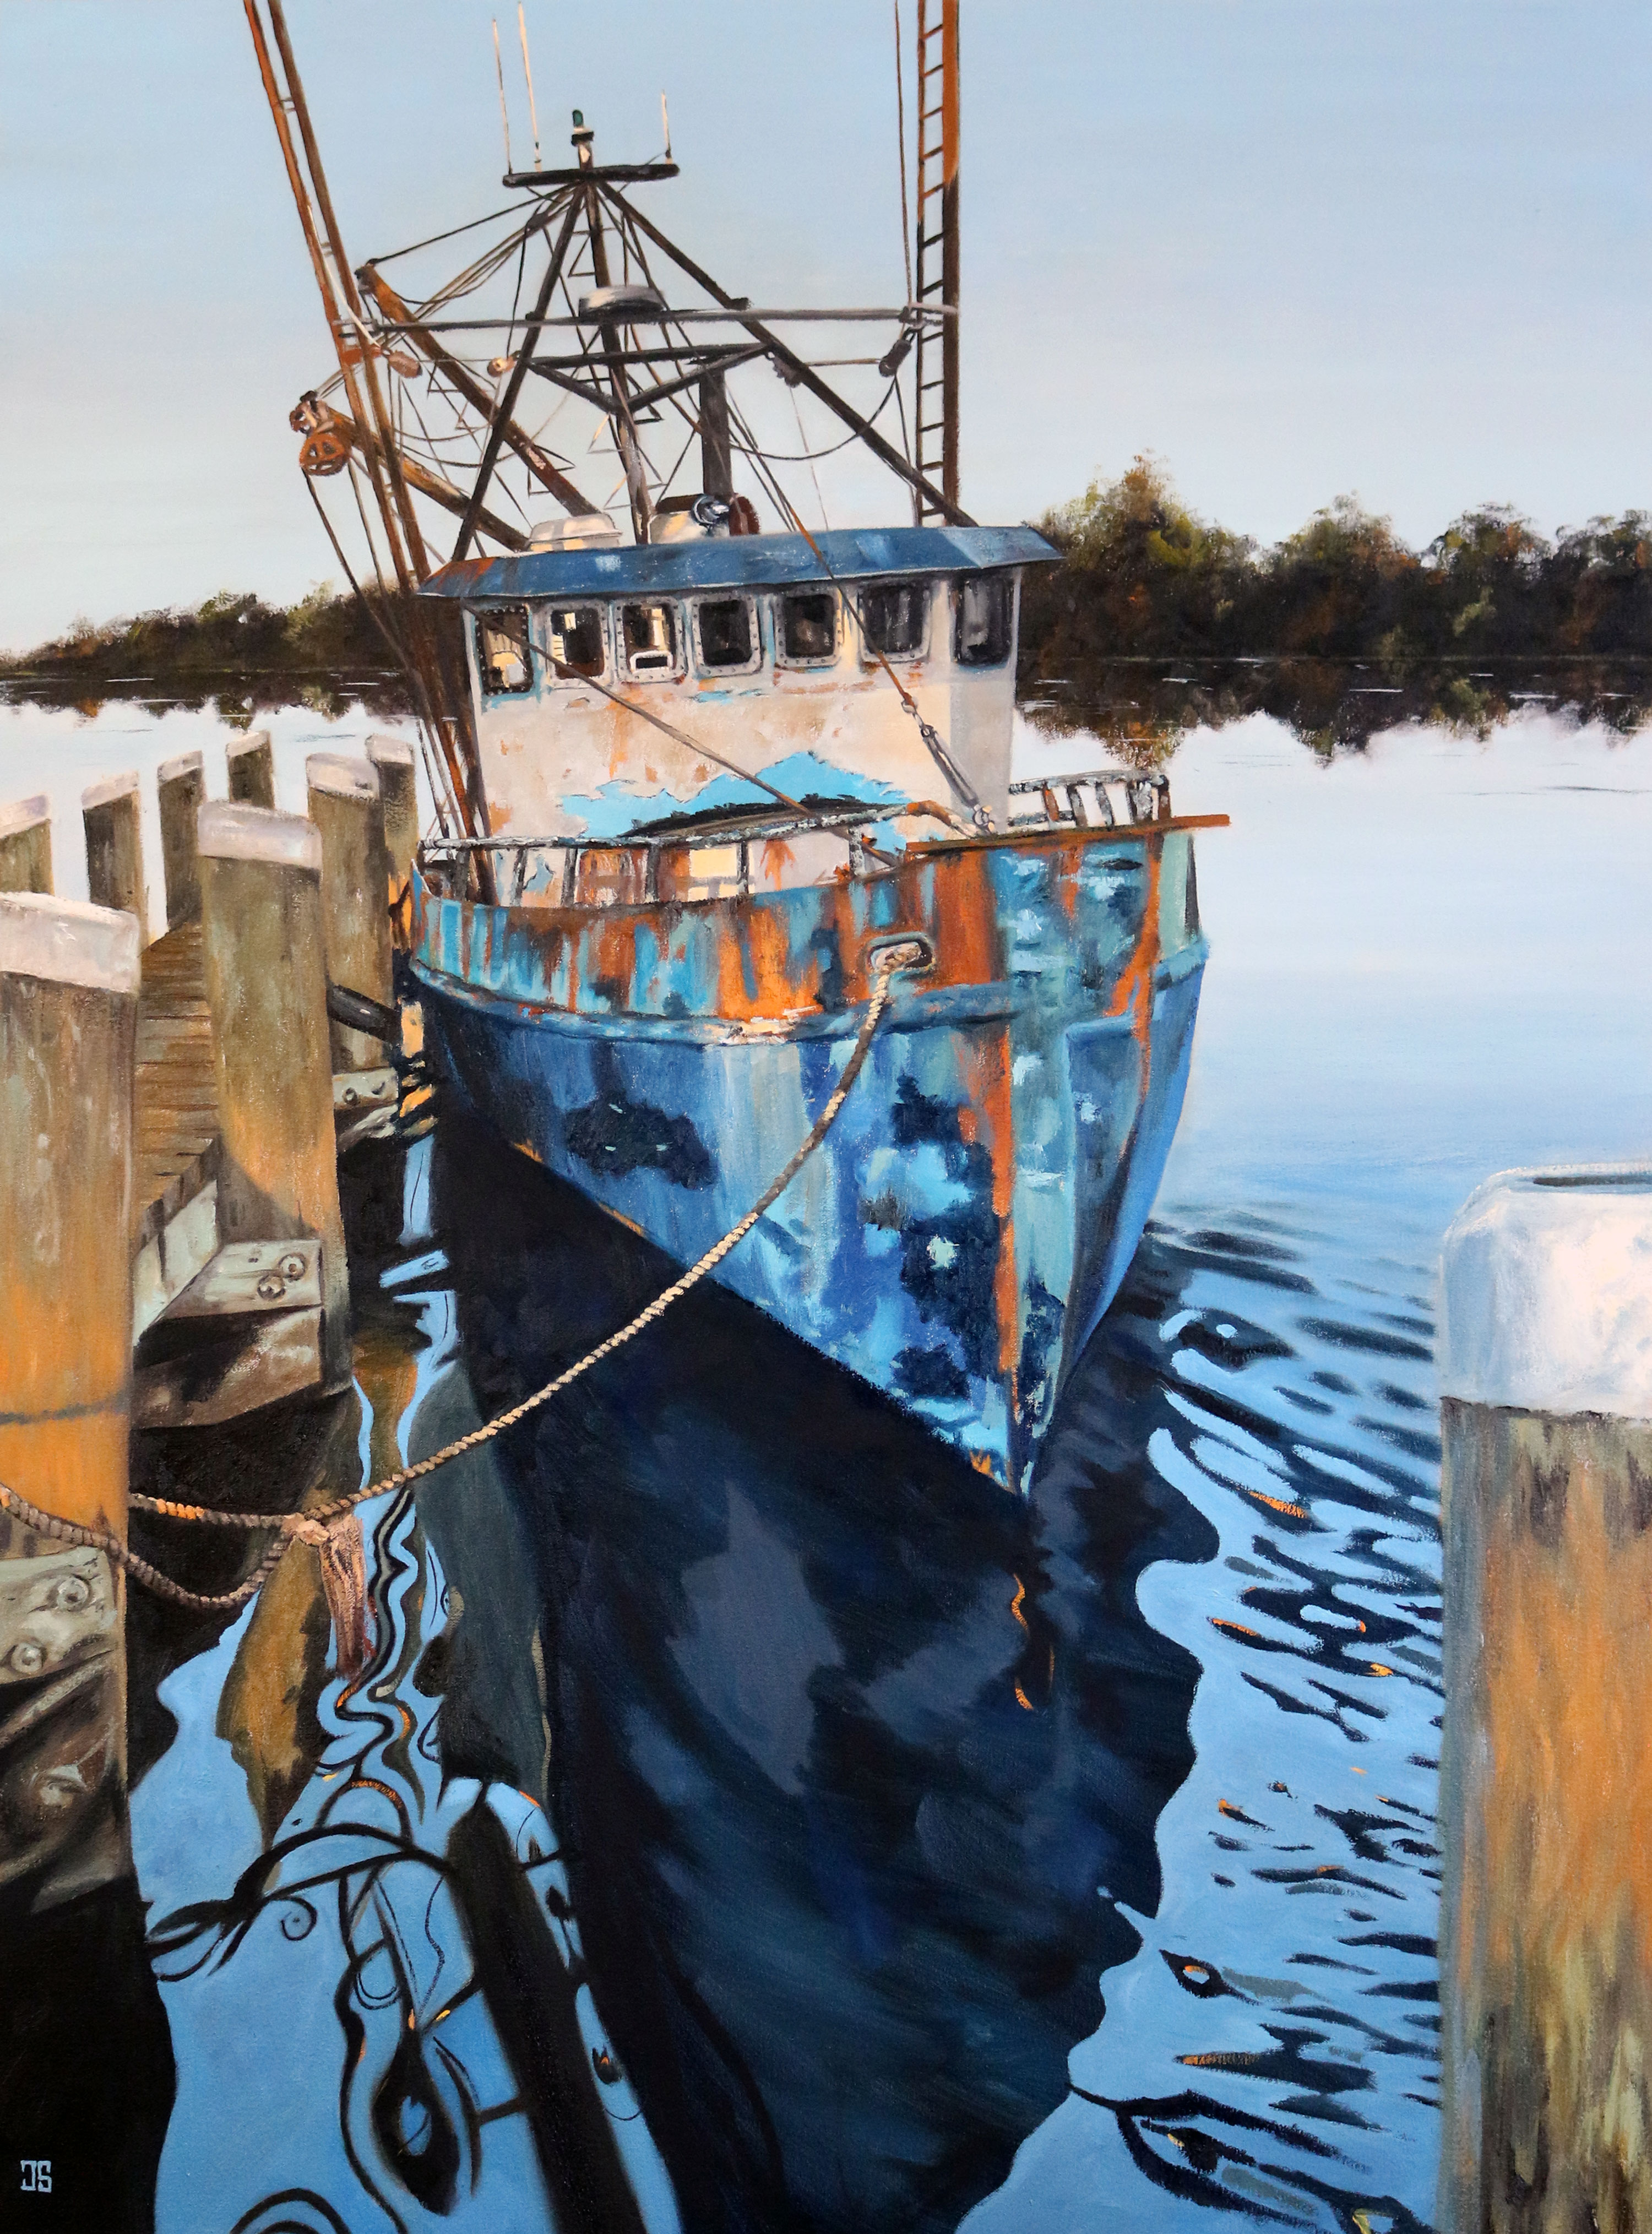 Oil painting "Salty Dog" by Jeffrey Dale Starr